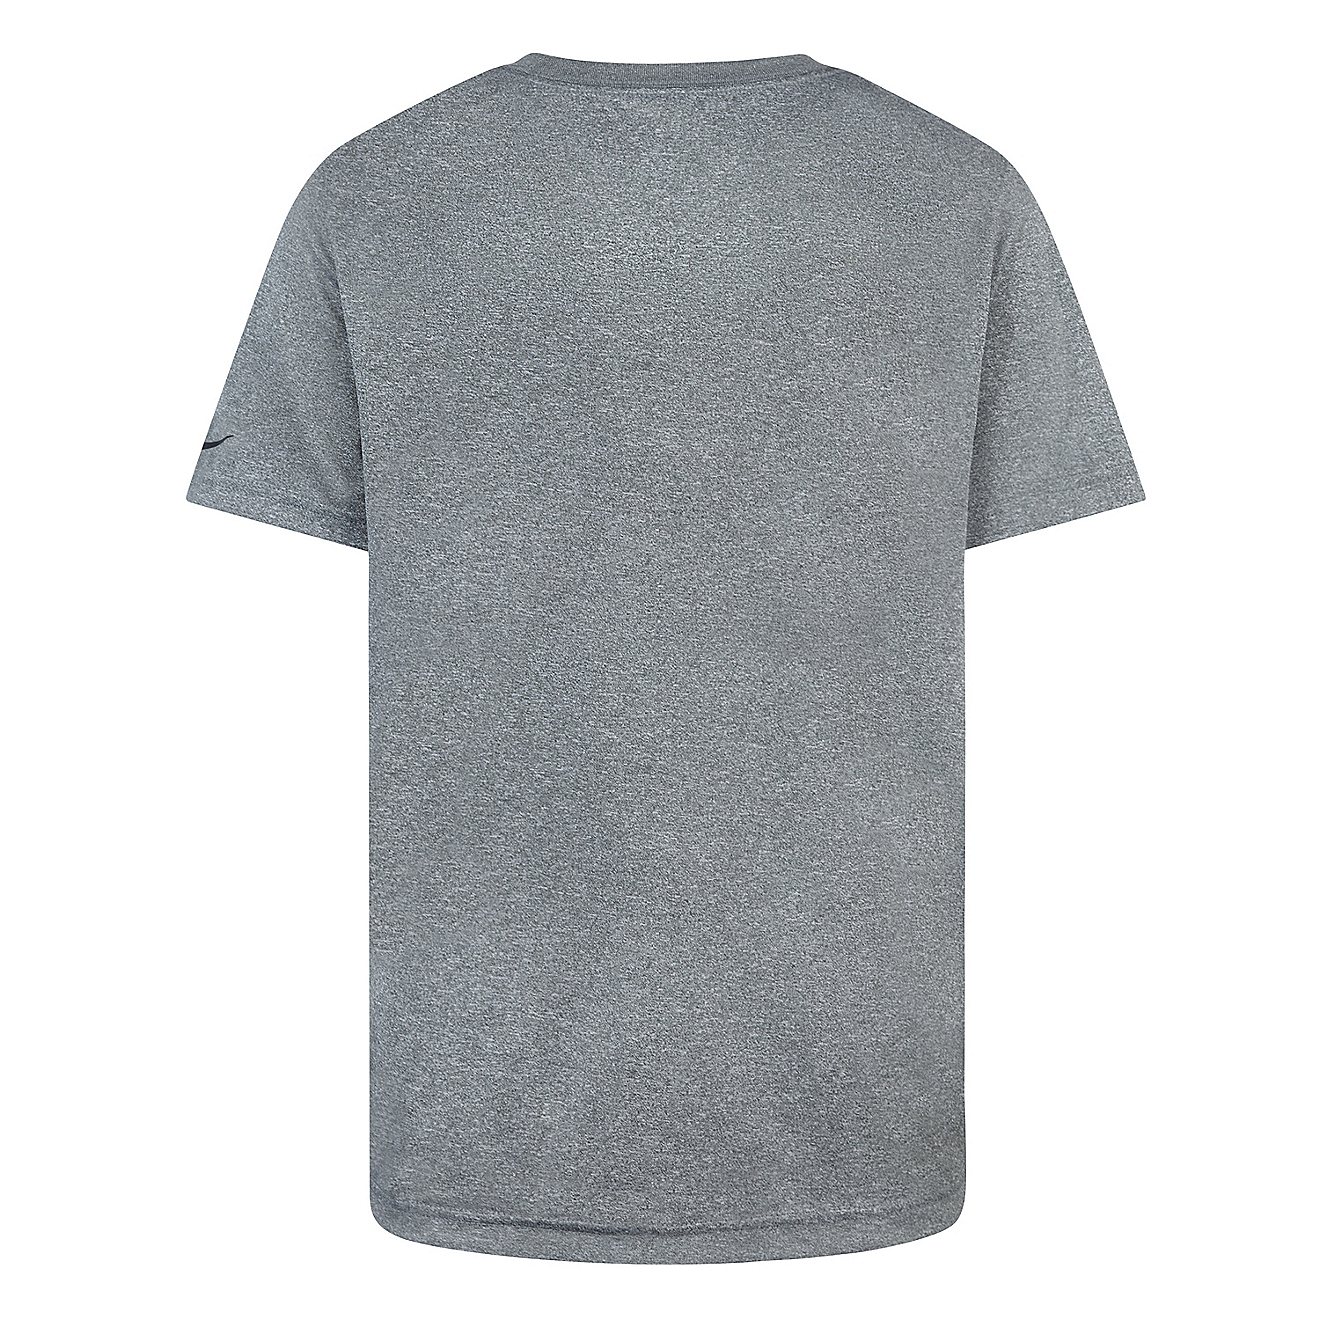 Nike Boys' 3BRAND by Russell Wilson Dual Logo T-shirt                                                                            - view number 2